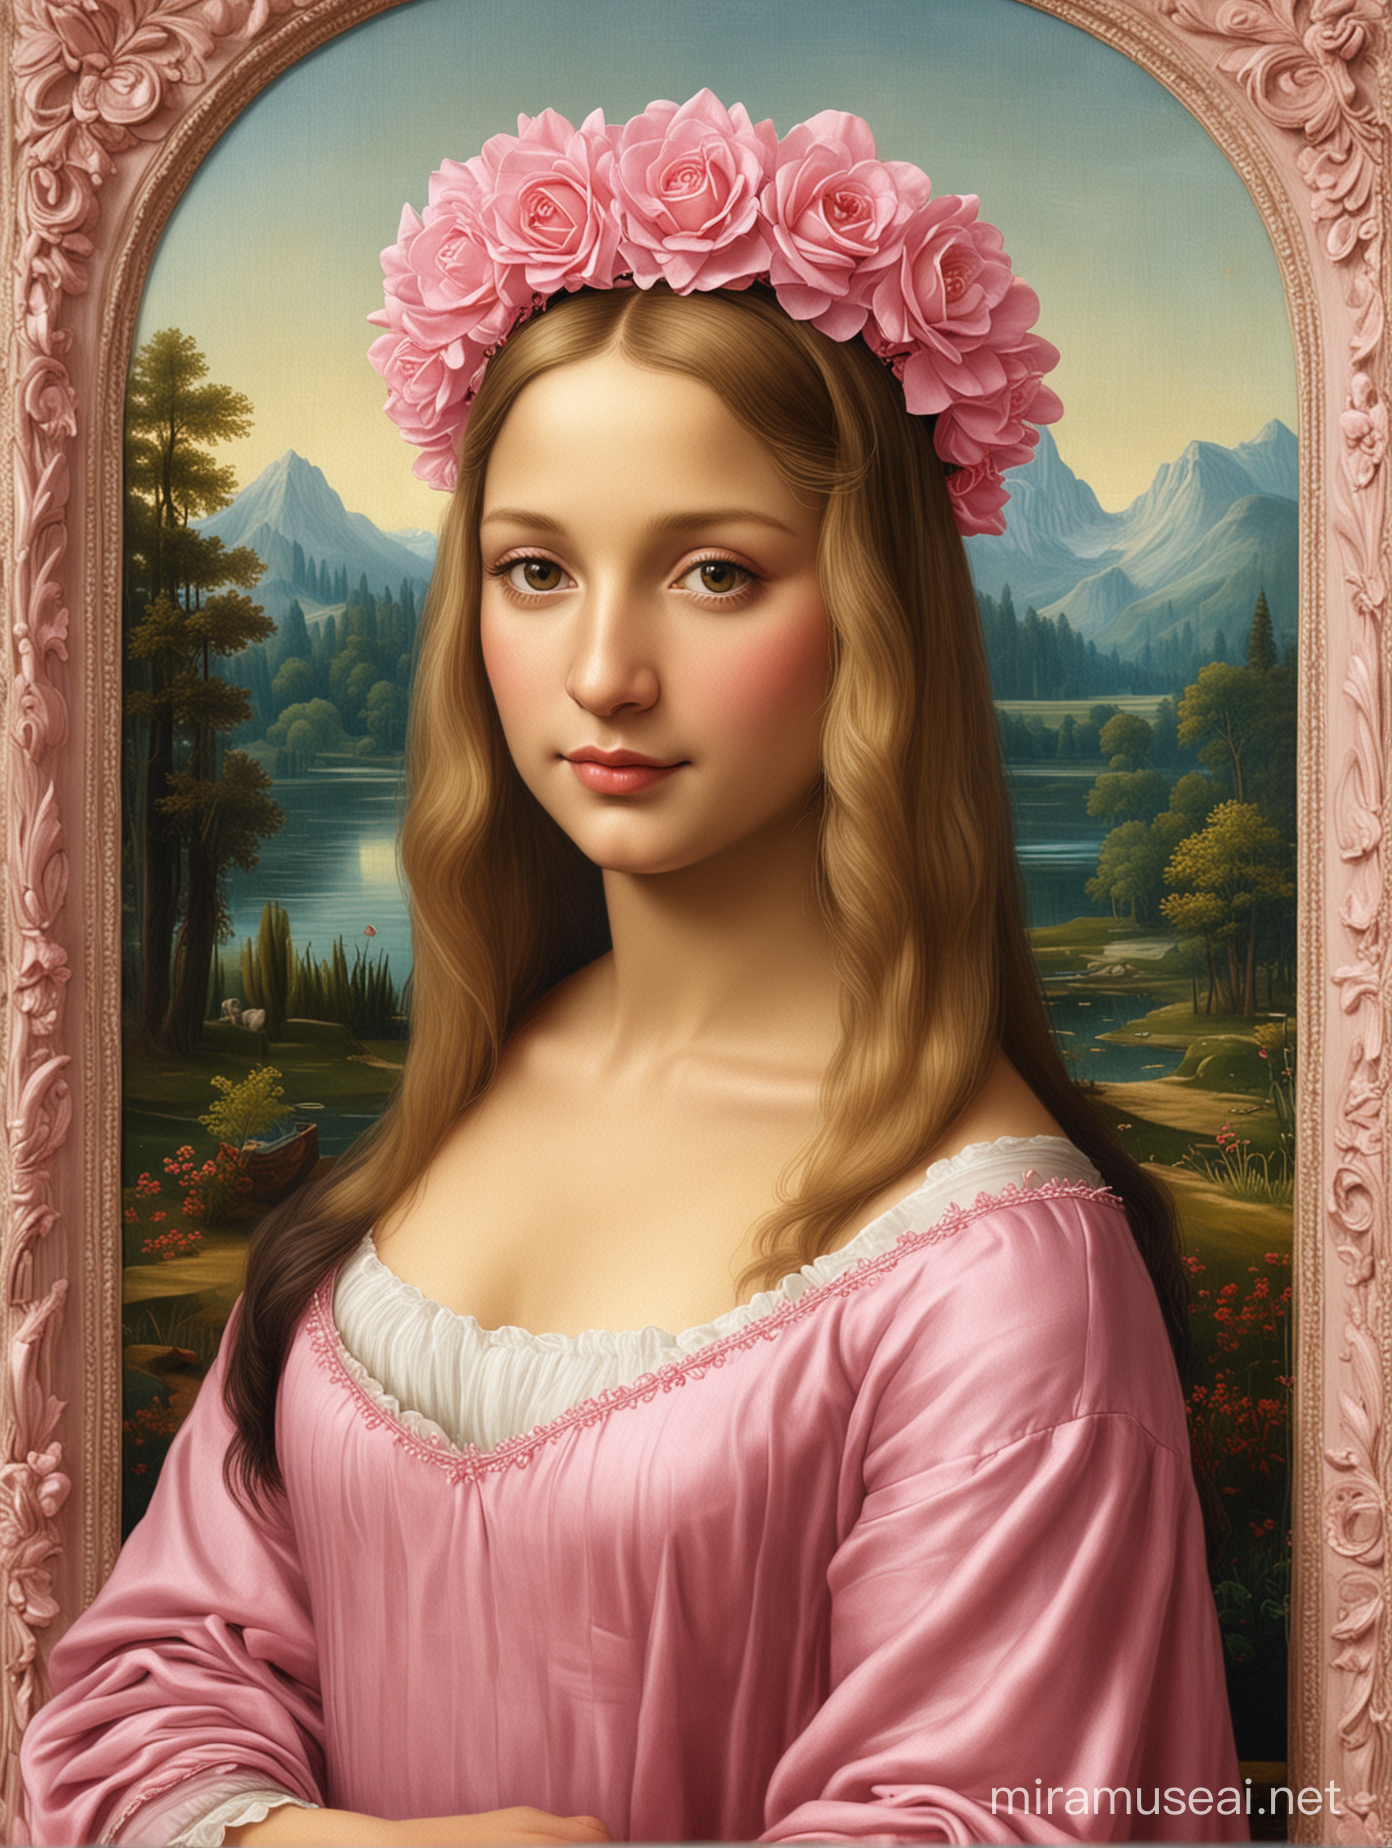 Blonde Mona Lisa in Nature with Pink Tiara and Dress